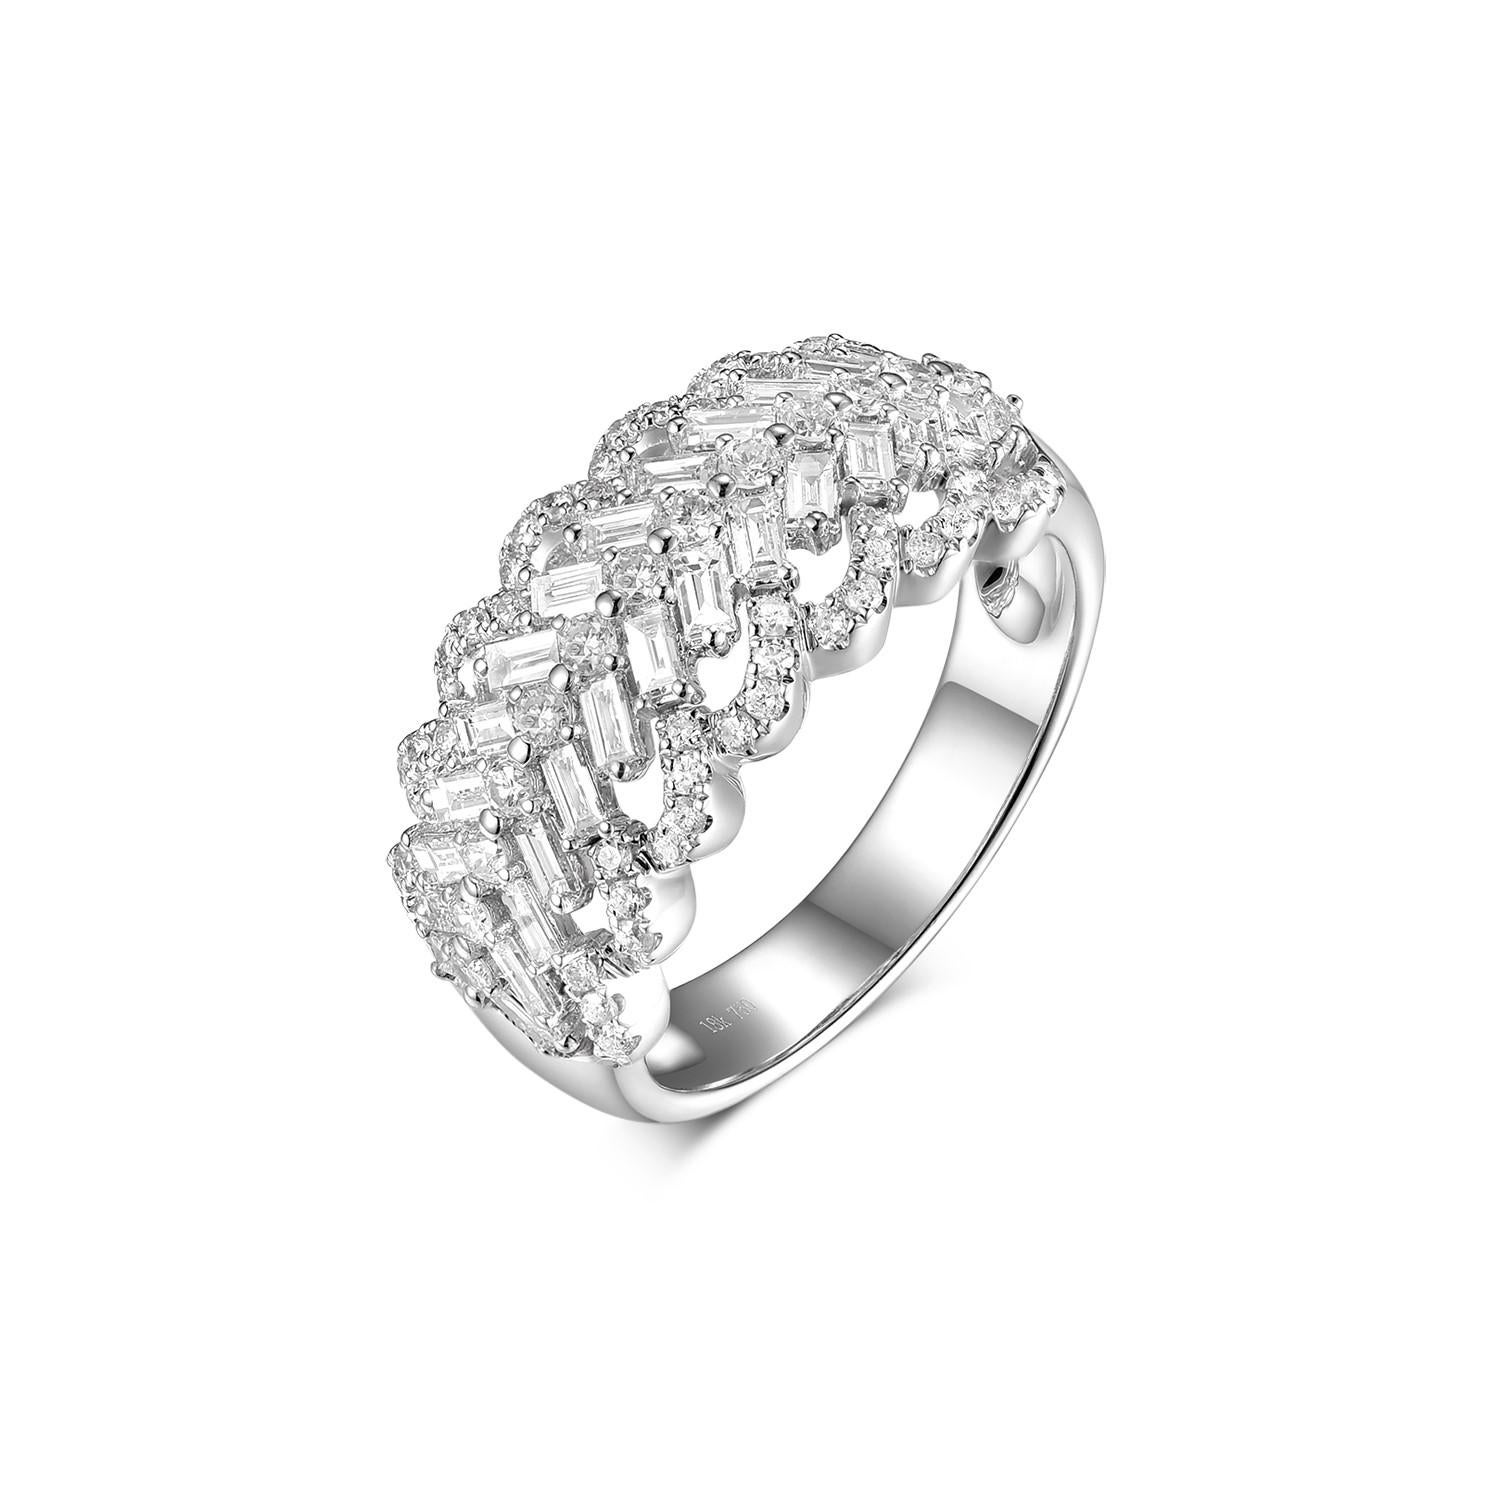 This half band ring features 0.58 carat of taper diamonds and 0.47 carat of round diamonds. Diamonds are set in 18 karat white gold. Great for everyday use and it is stack-able with other thinner band rings. 

US 6.5
Resizing is available
Taper